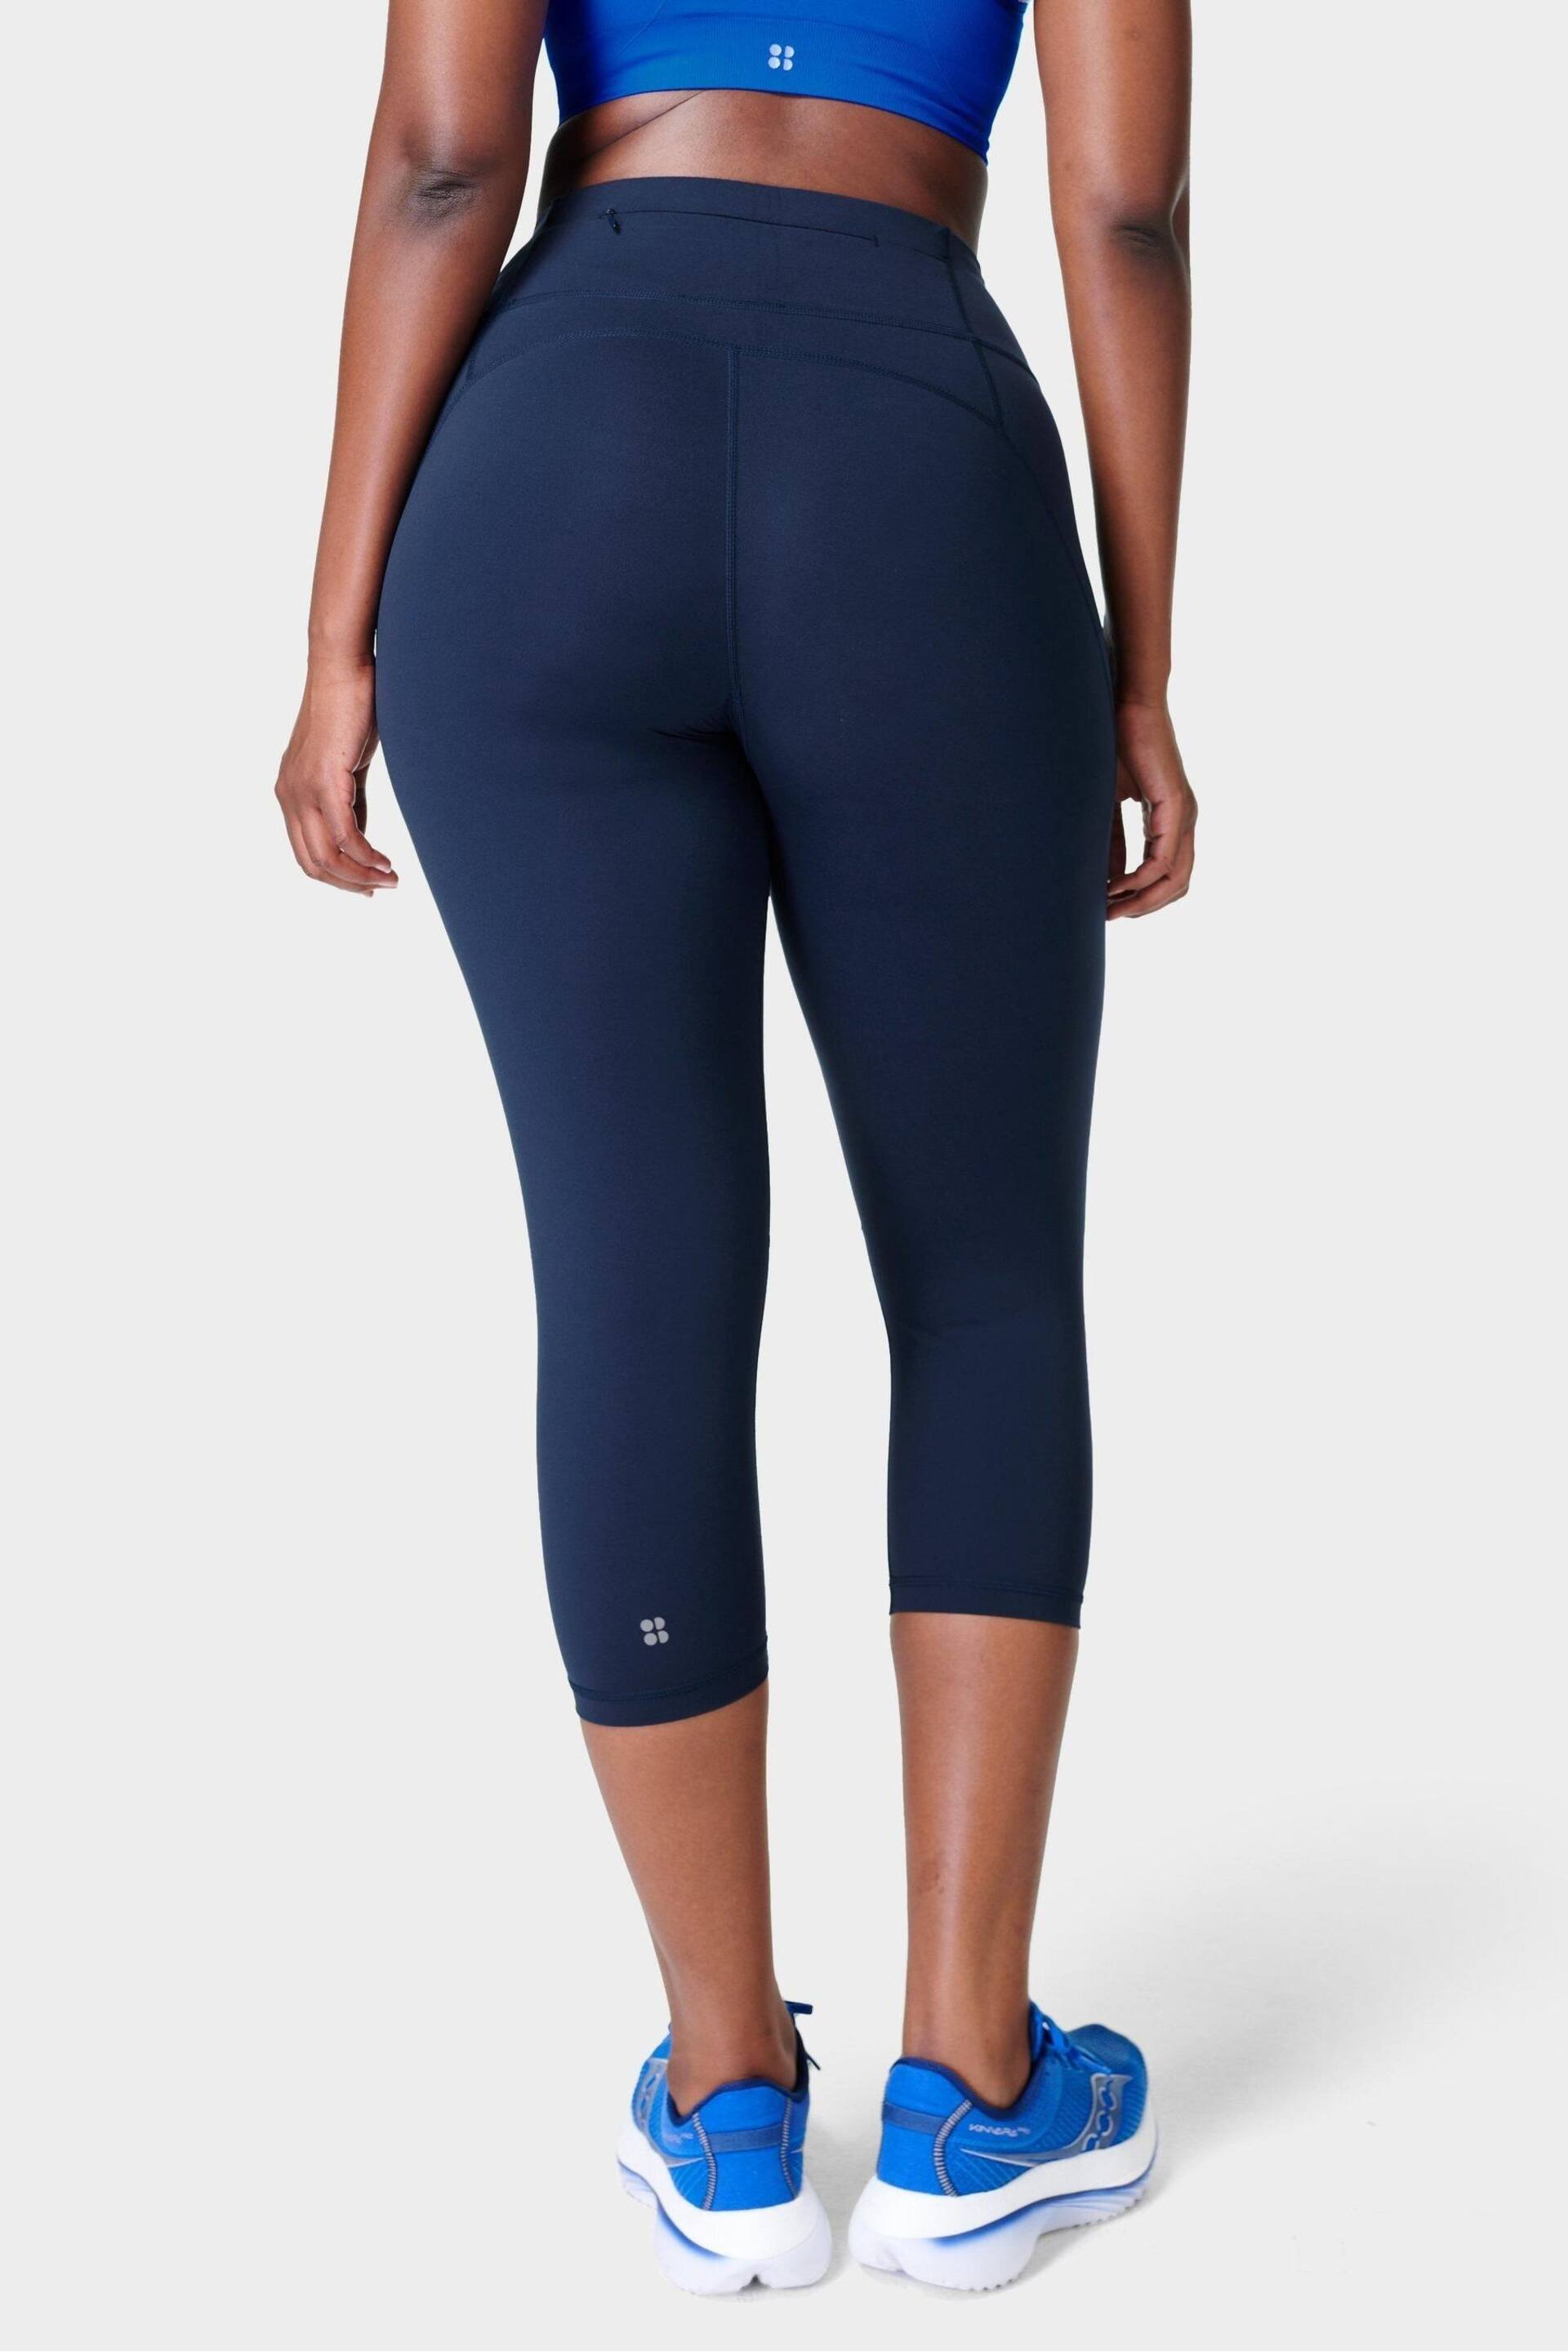 Sweaty Betty Navy Blue Power Cropped Workout Leggings - Image 4 of 11